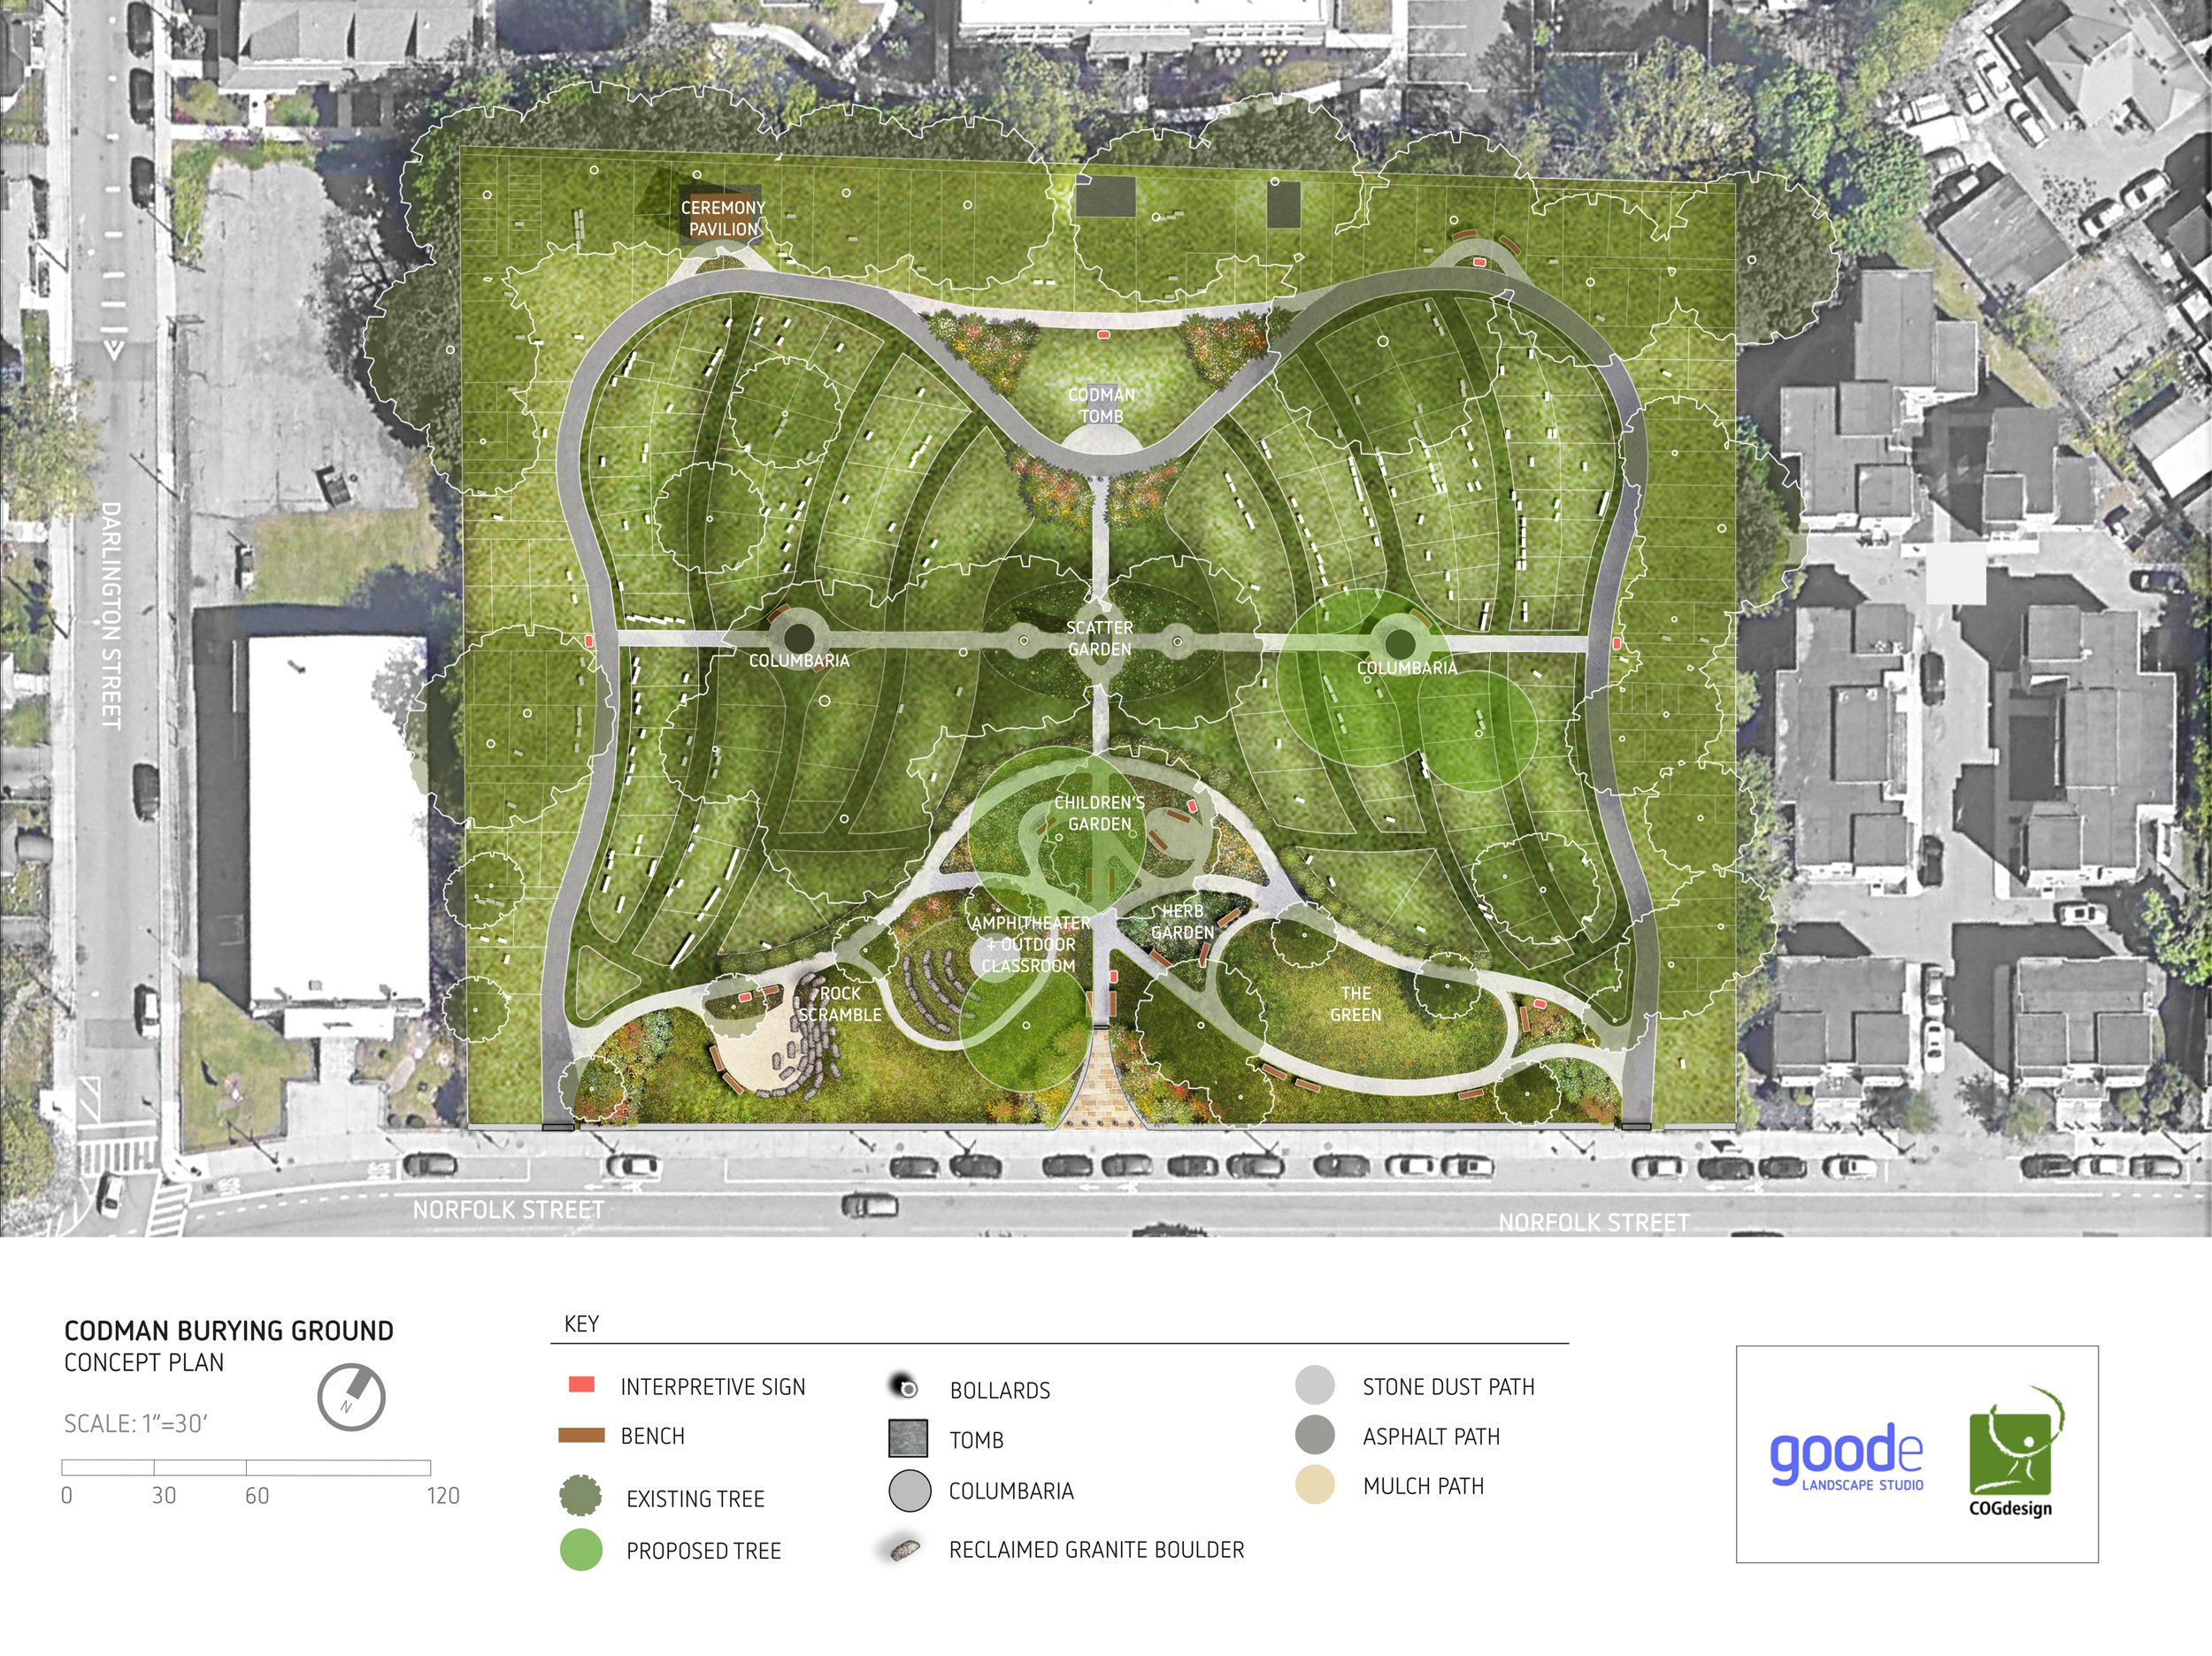 Plan of the Updates to Codman Burying Ground and Park